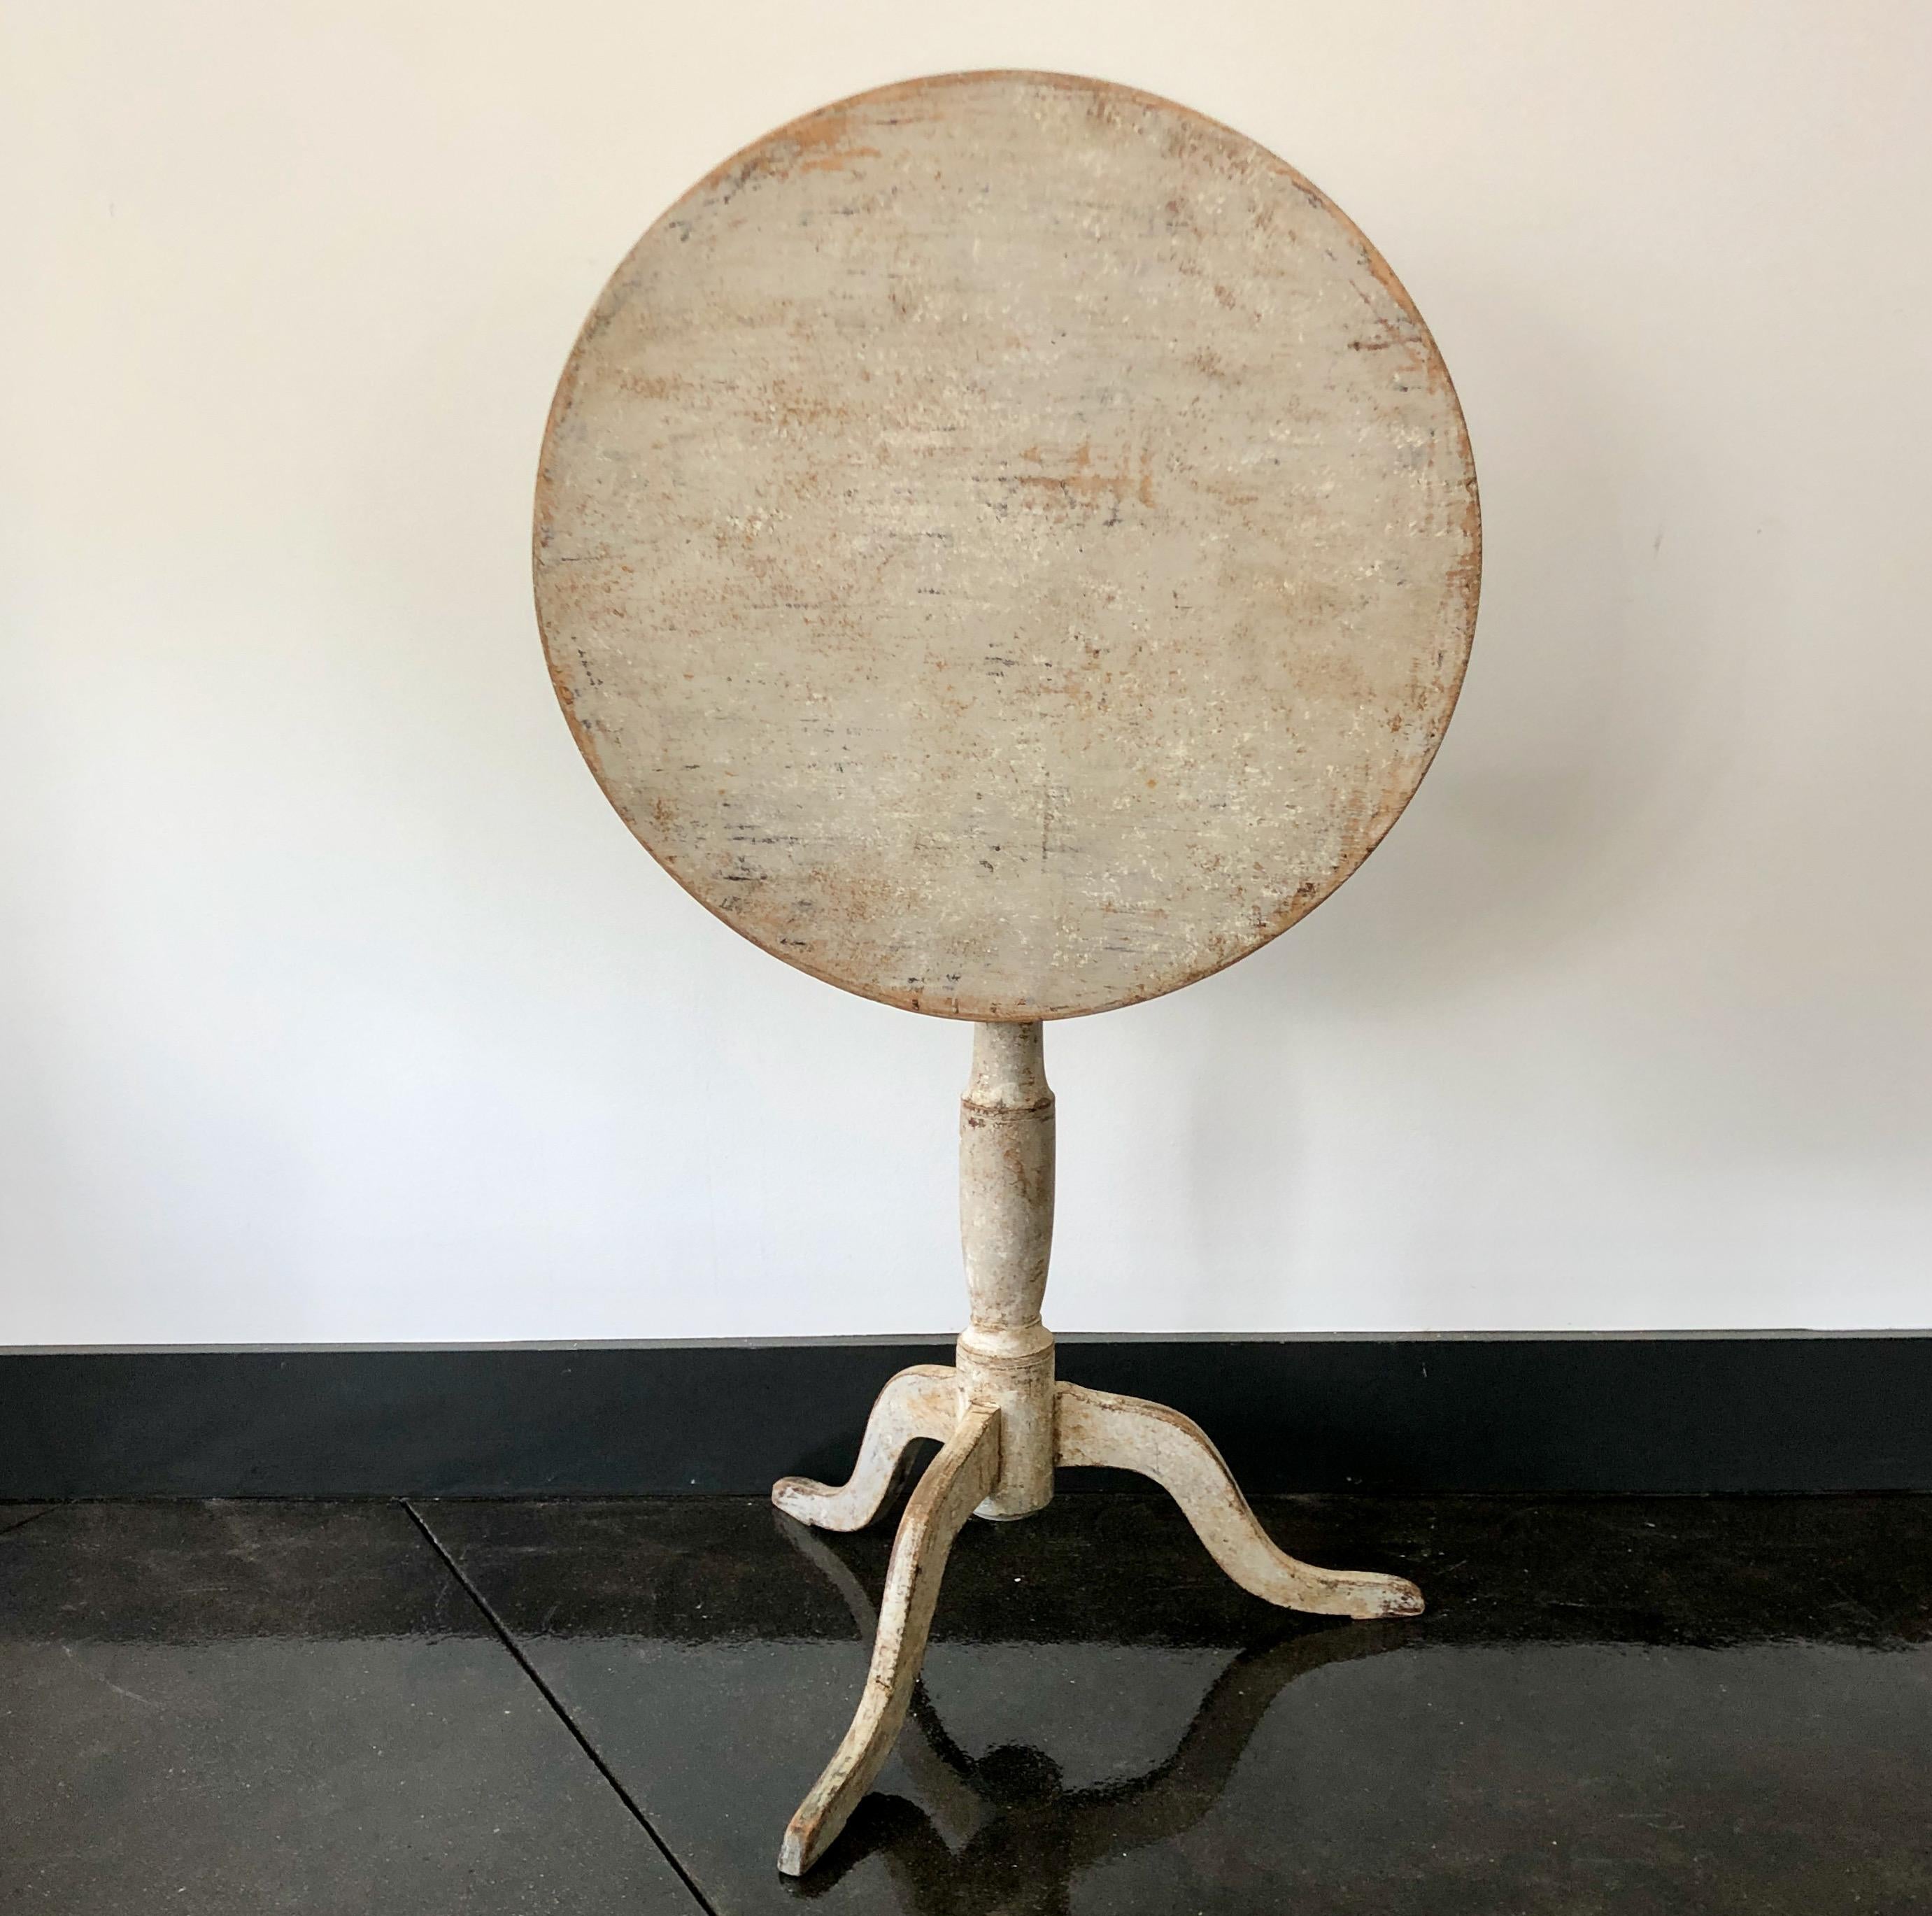 19th century Swedish round tilt top pedestal table with turned base supported by beautifully carved legs. Scraped back to traces of its original color.
Stockholma, Sweden circa 1830-1840.